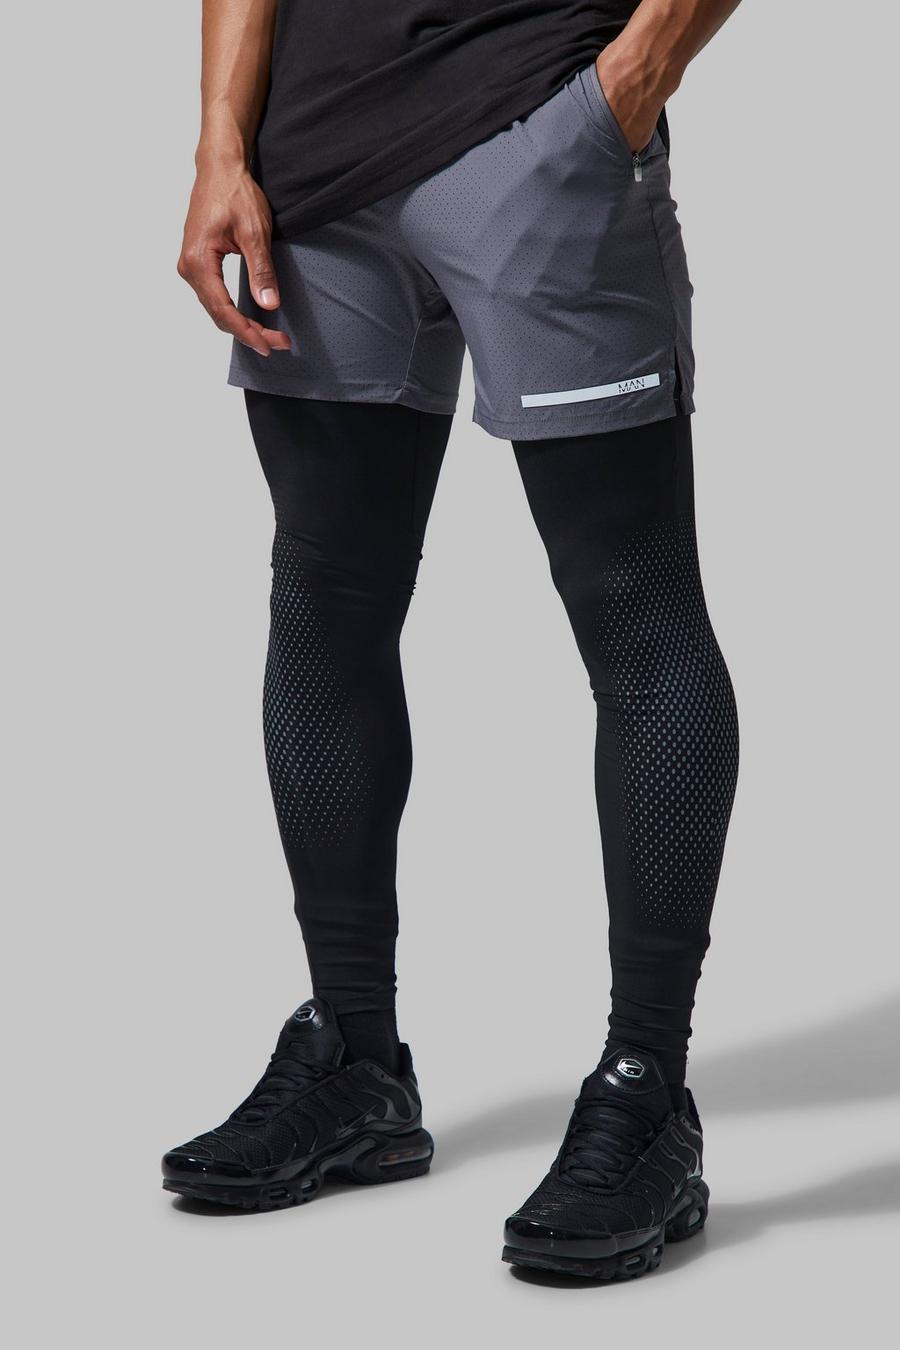 Charcoal grey Man Active Performance 2 In 1 Leggings